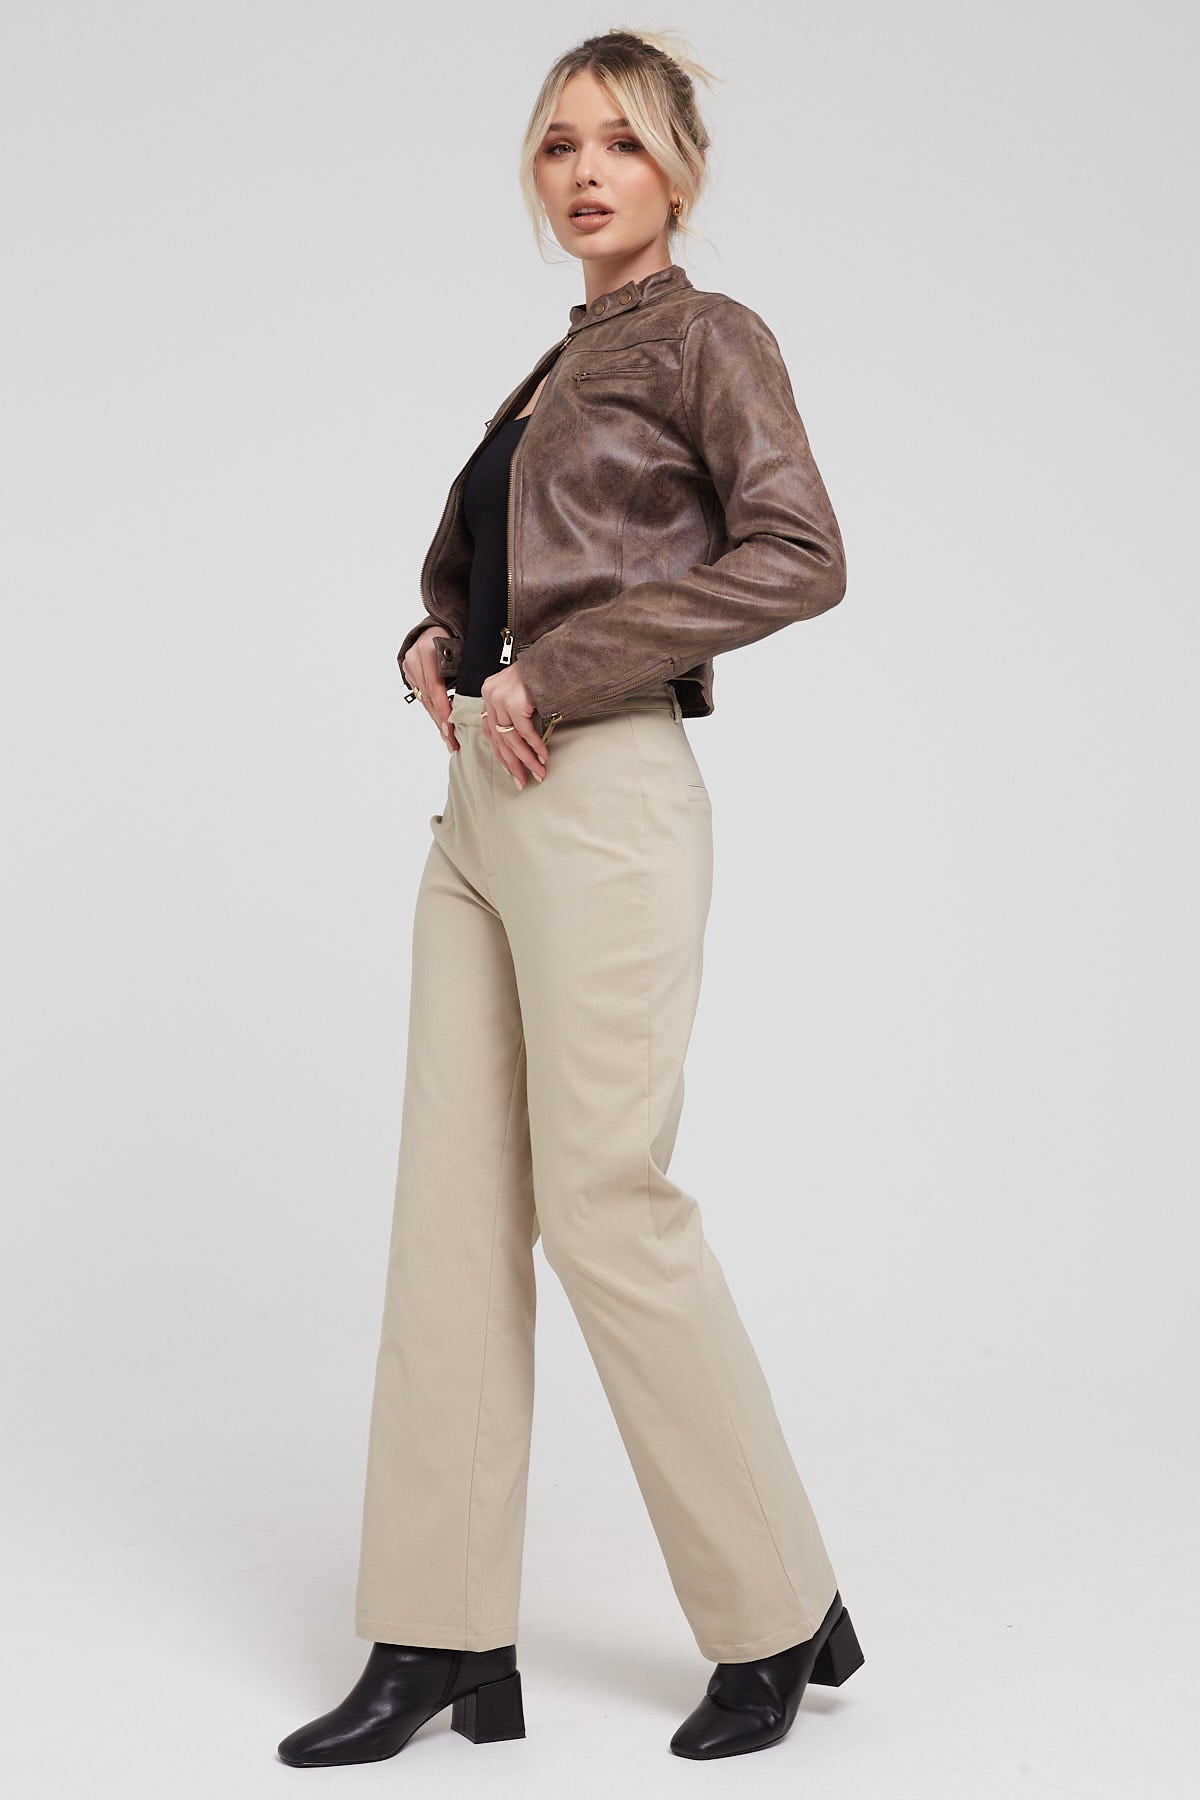 Luck & Trouble Renni Thin Waist Pant Nude